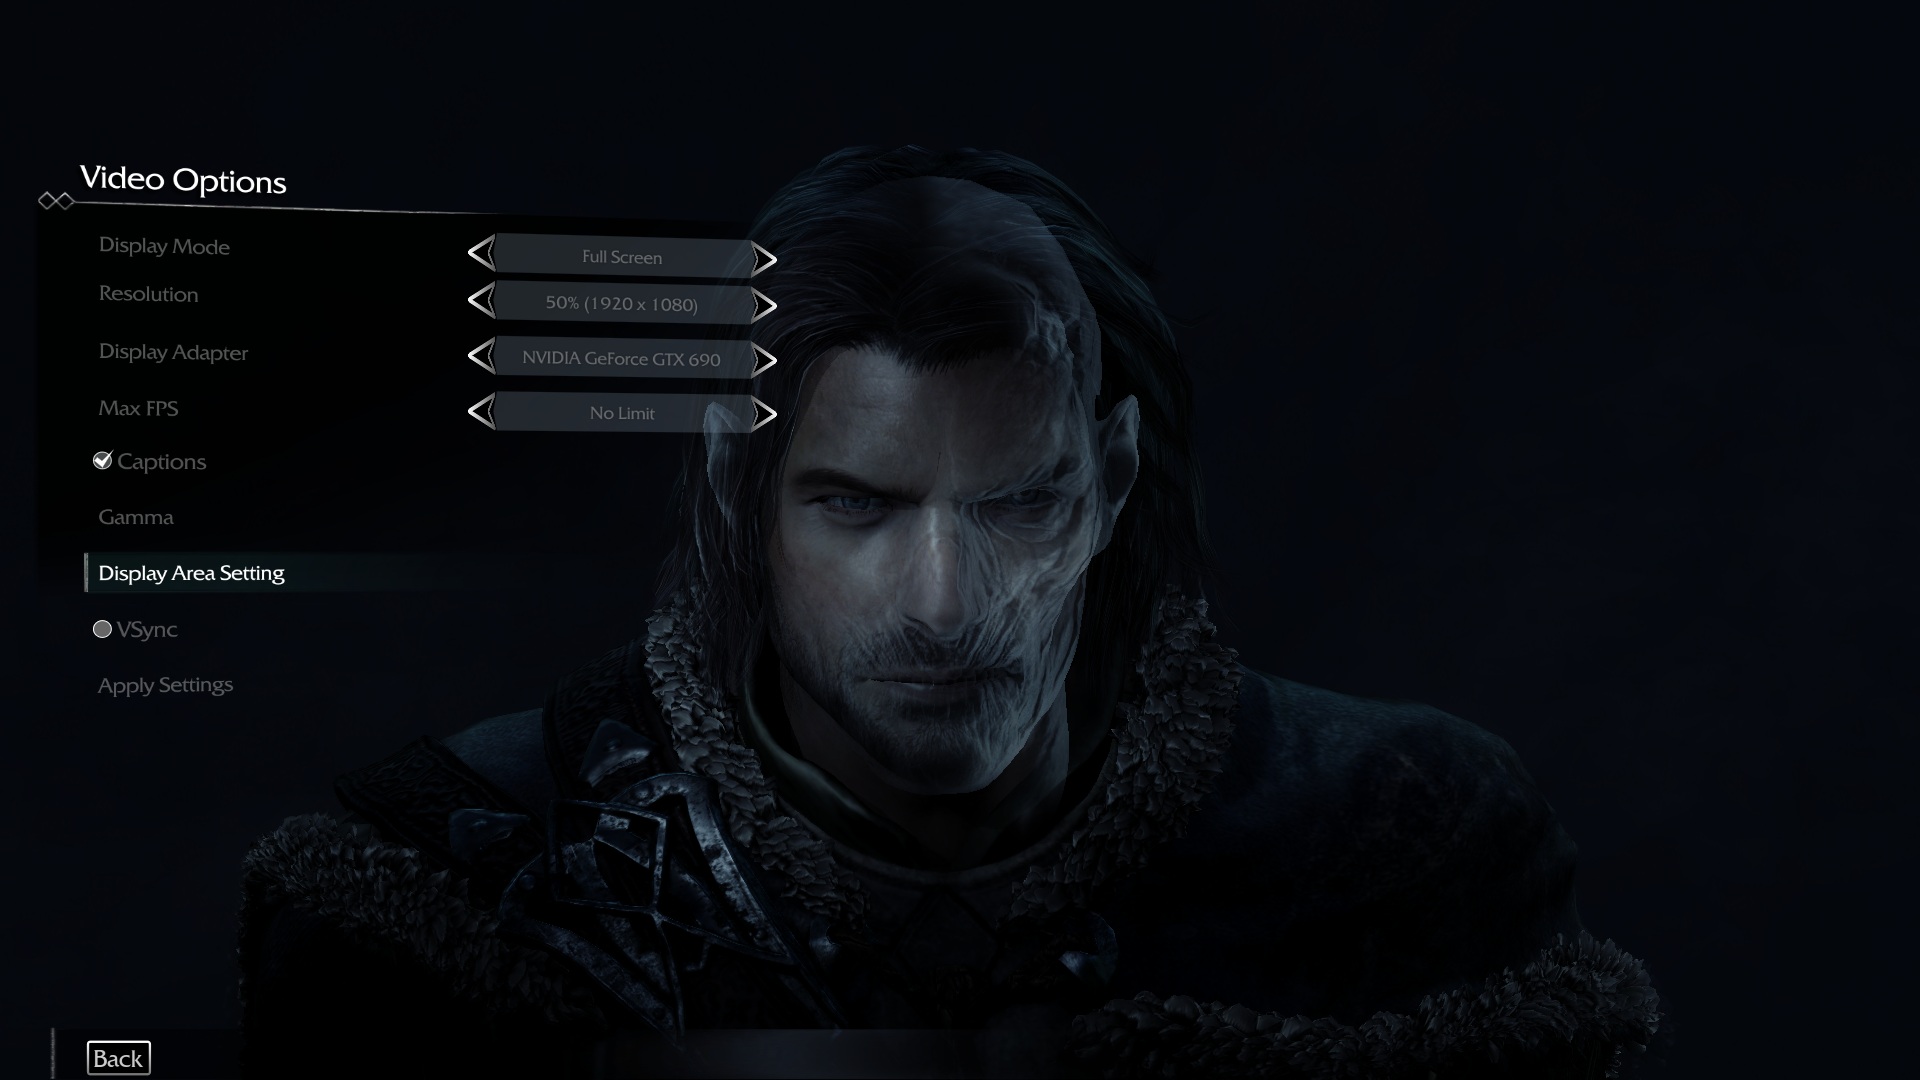 Middle-earth: Shadow of Mordor PC specs revealed